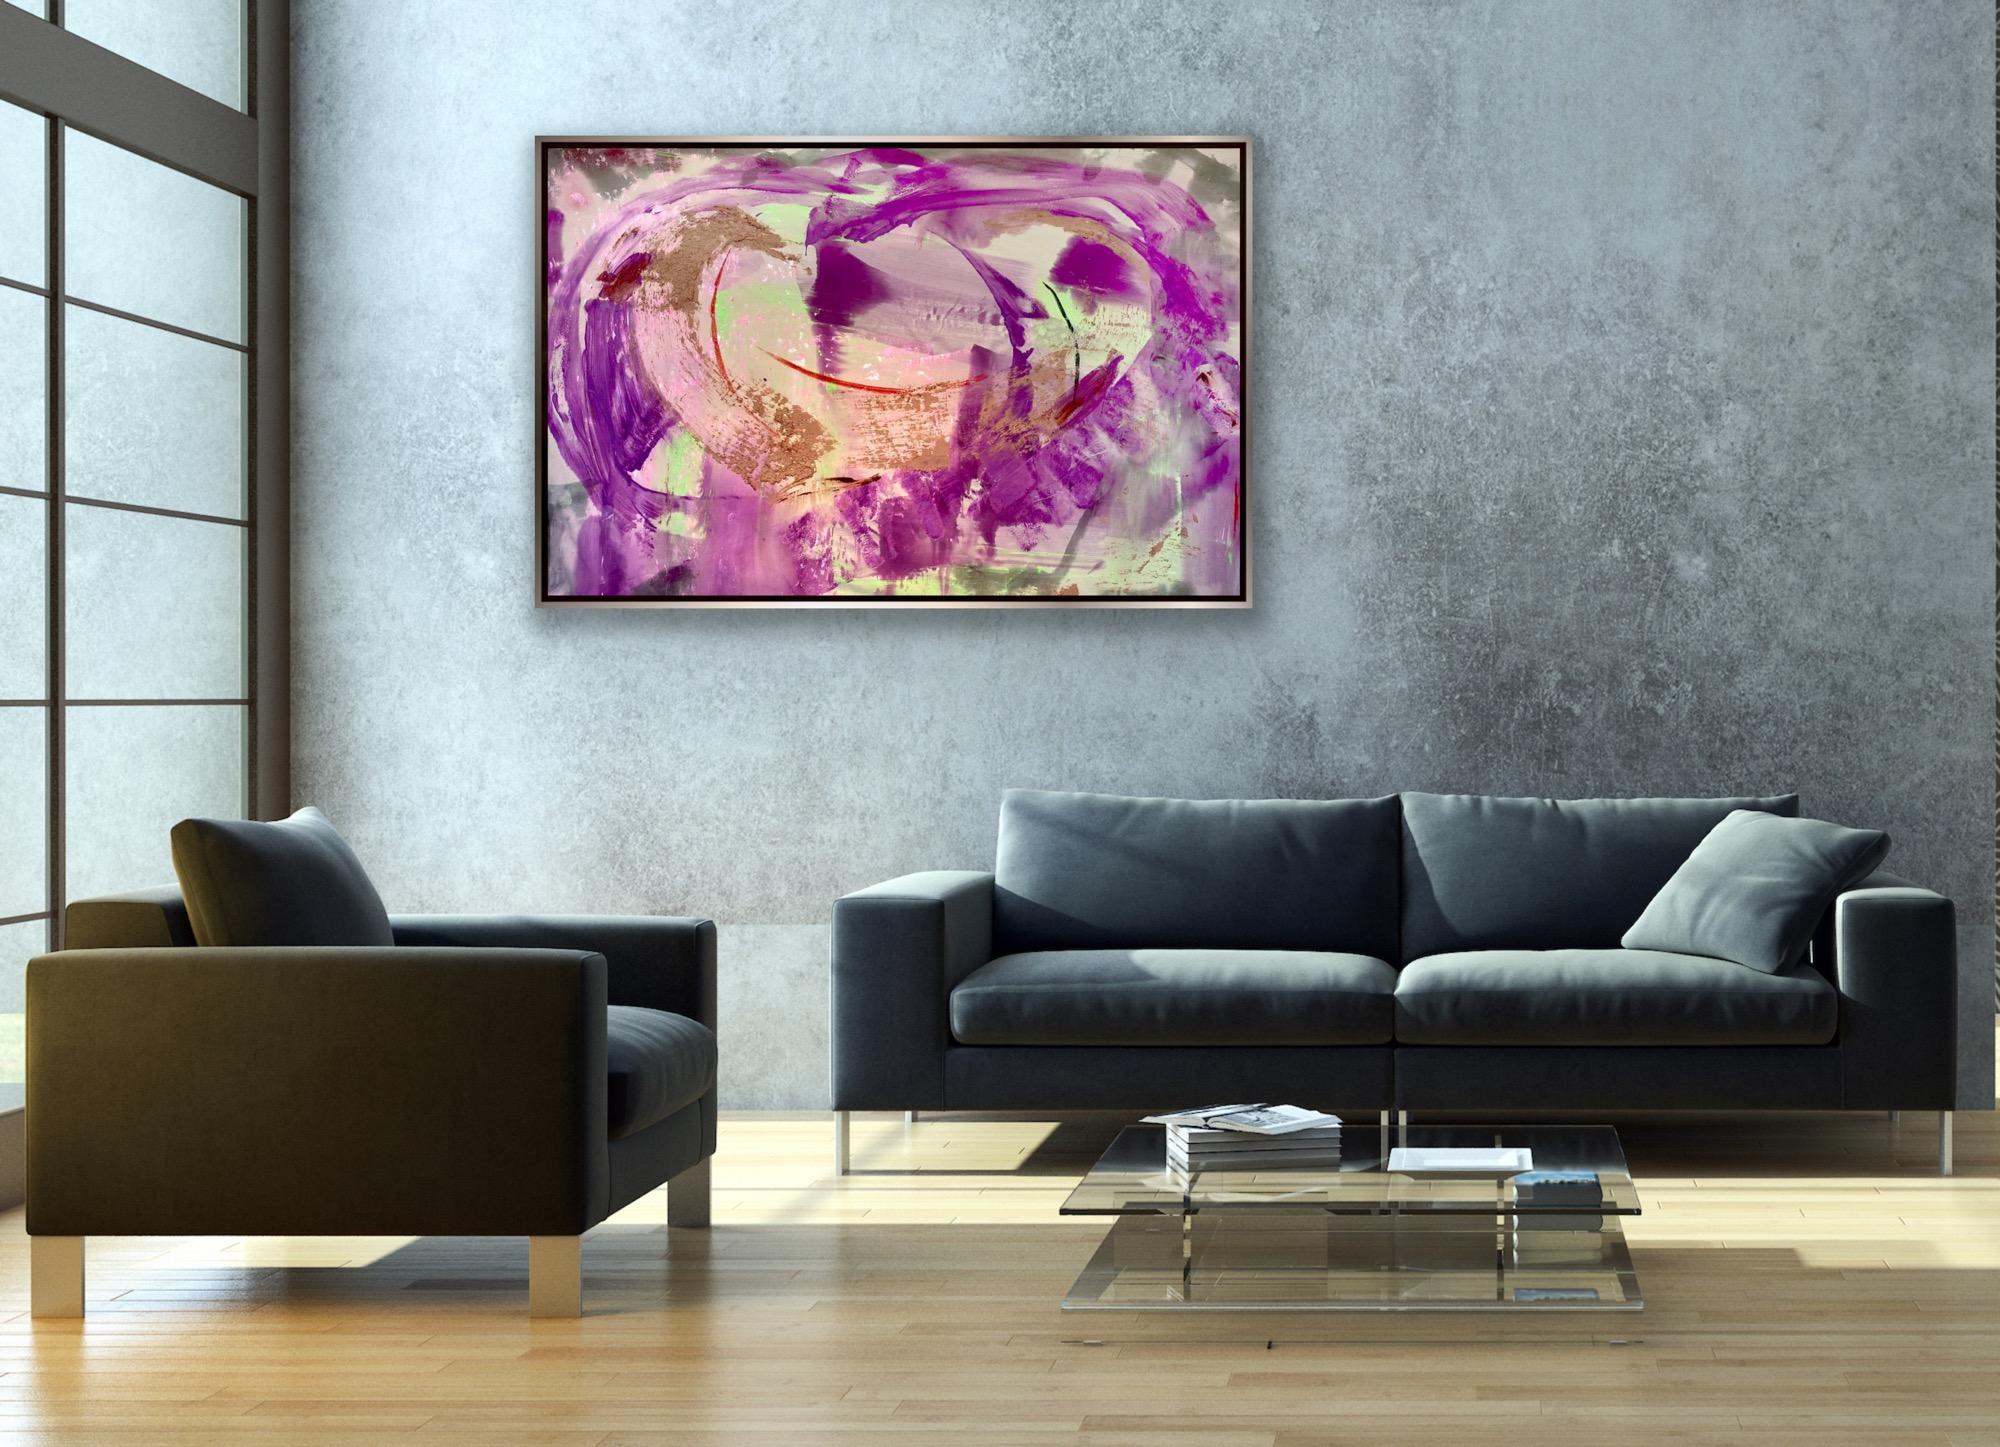 Bijoux - Abstract Expressionist Painting by Francine Tint